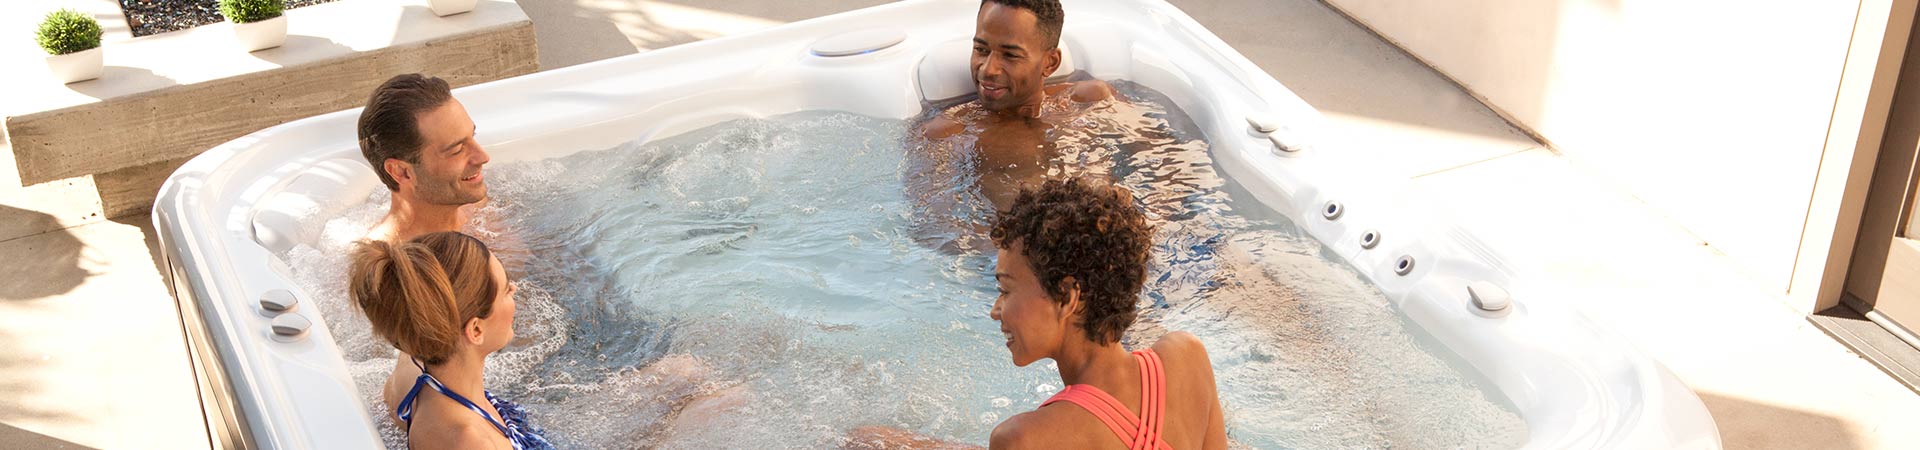 3 Reasons to Buy a Portable Spa for Your Home, Hot Tubs New Berlin